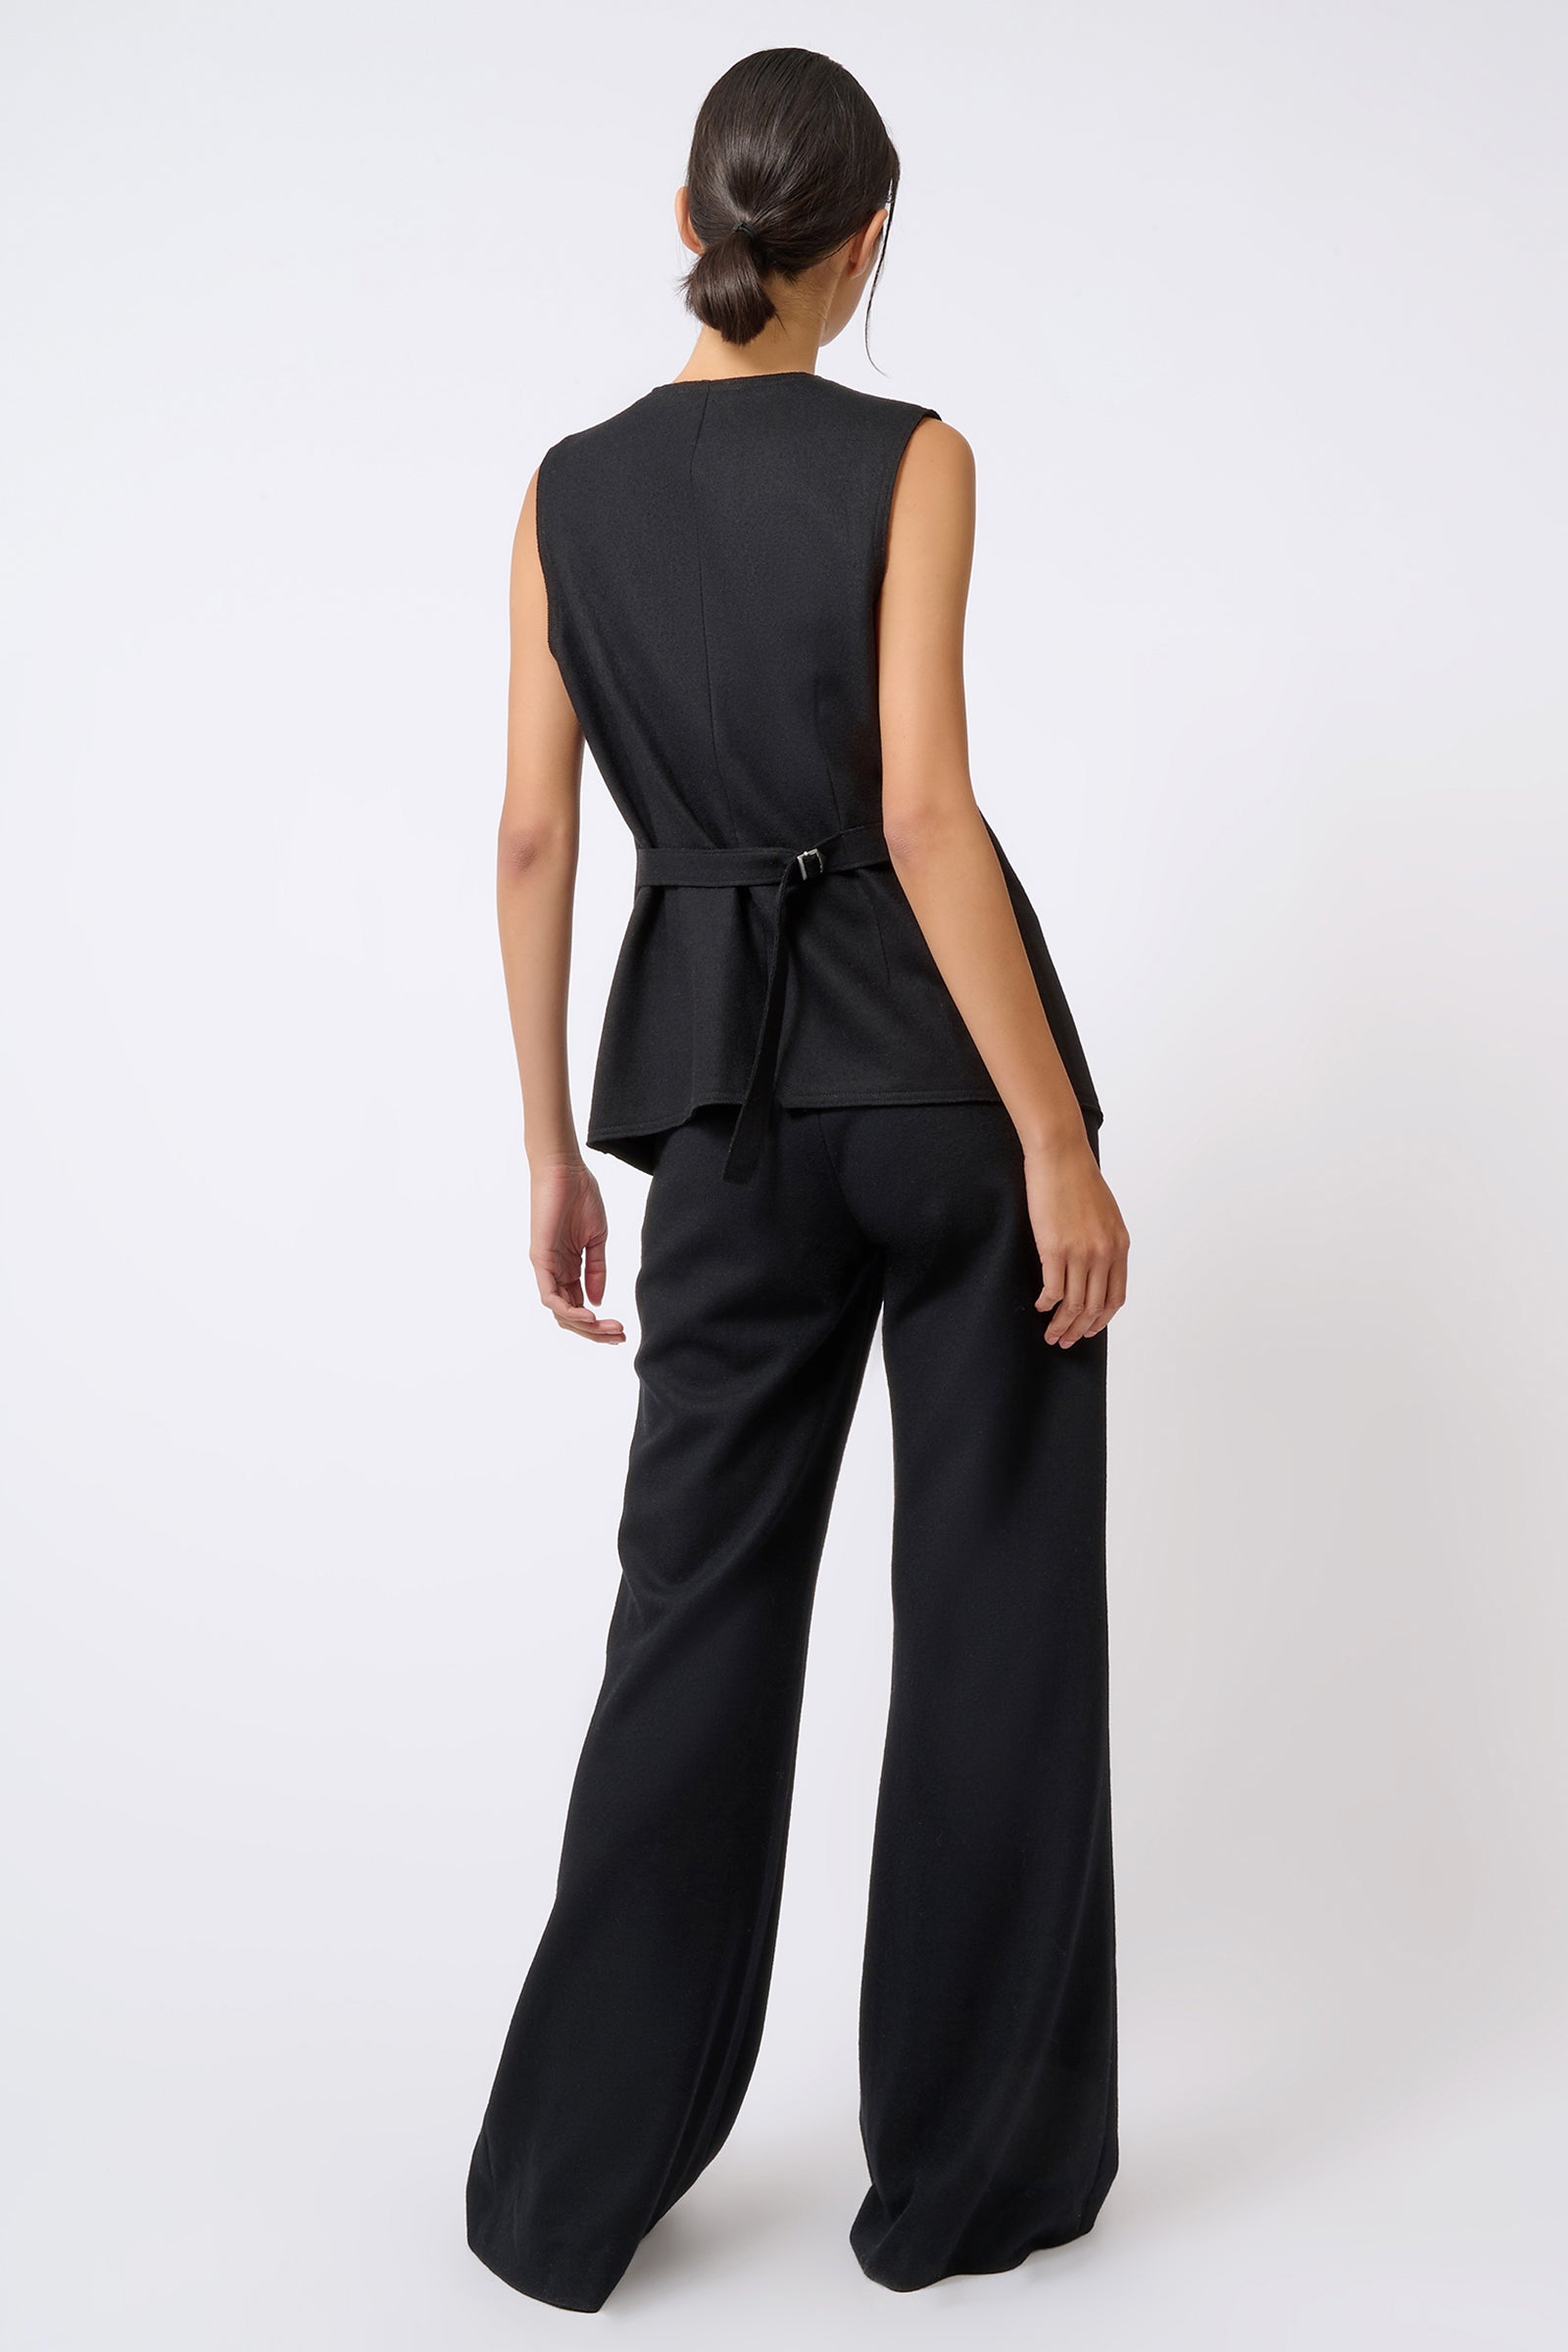 Kal Rieman Raw Edge Vest in Black on Model with Turtleneck Underneath Full Front View